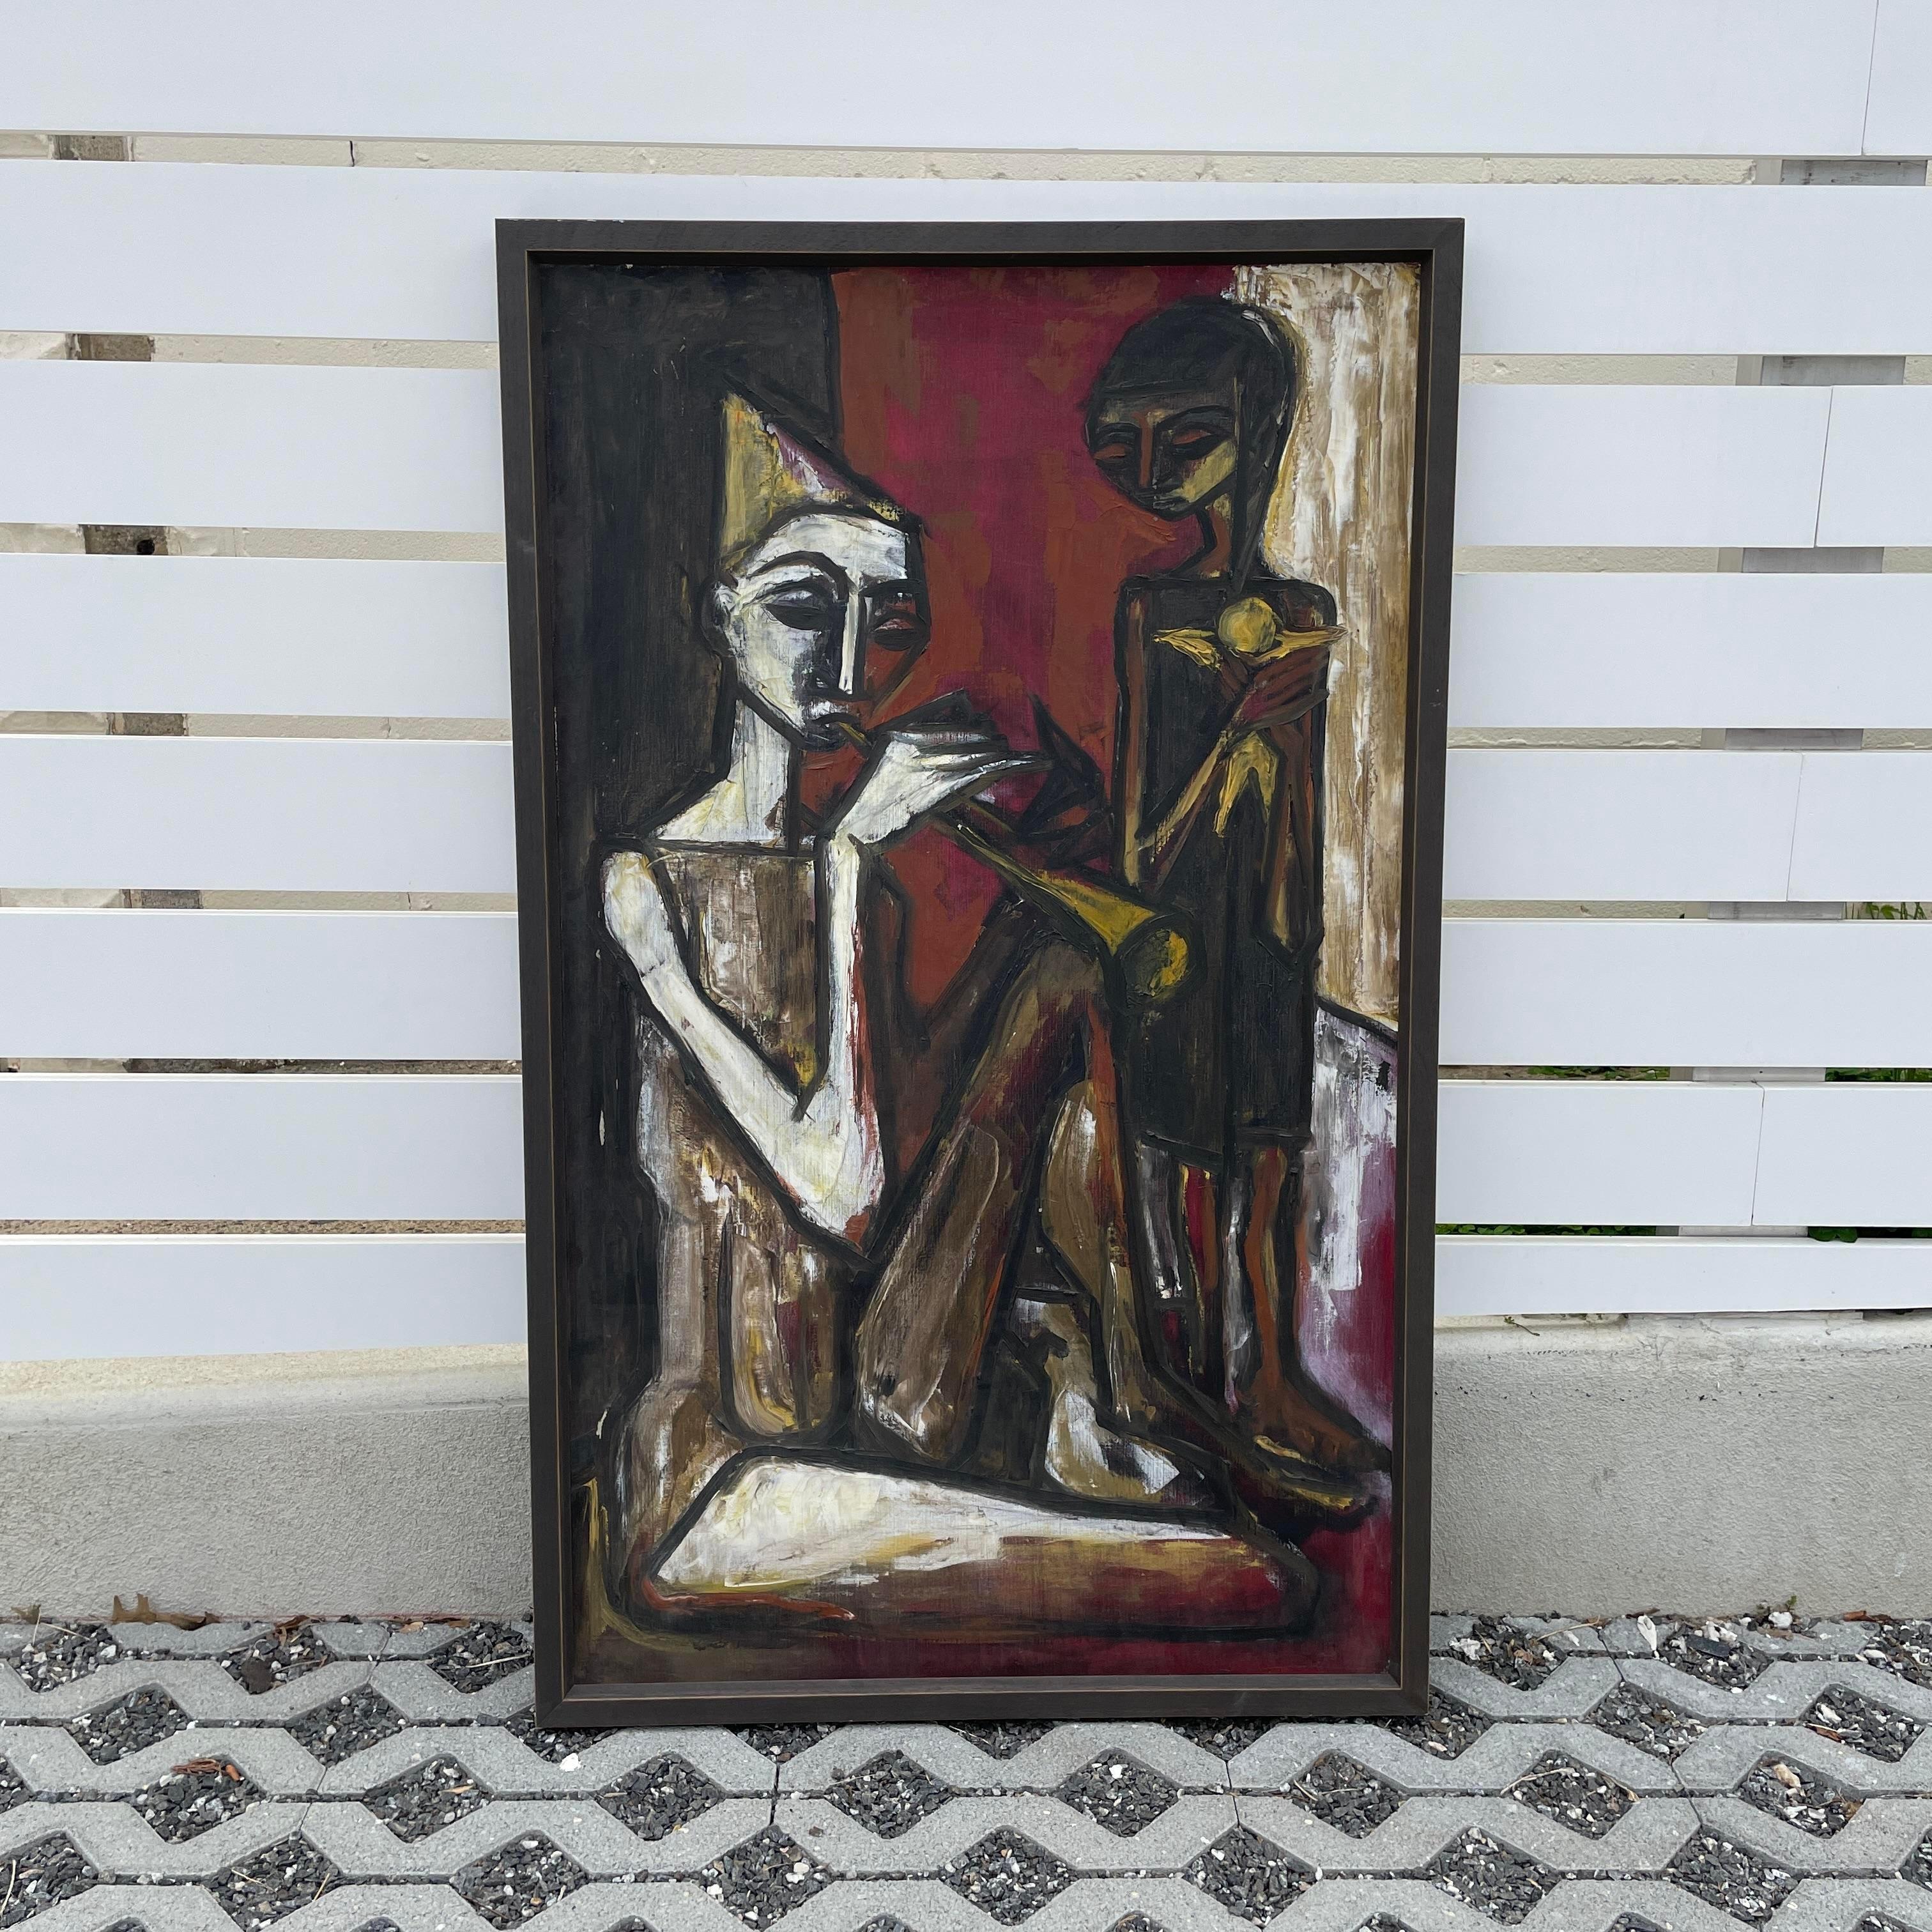 A 1950s vintage original canvas painting by Jacques Dunham of a brass instrument or horn player. The painting comes professionally framed. It is signed and dated 1959 in the upper right corner. Measures 32” wide x 52 1/2” tall x 1 3/4” deep.